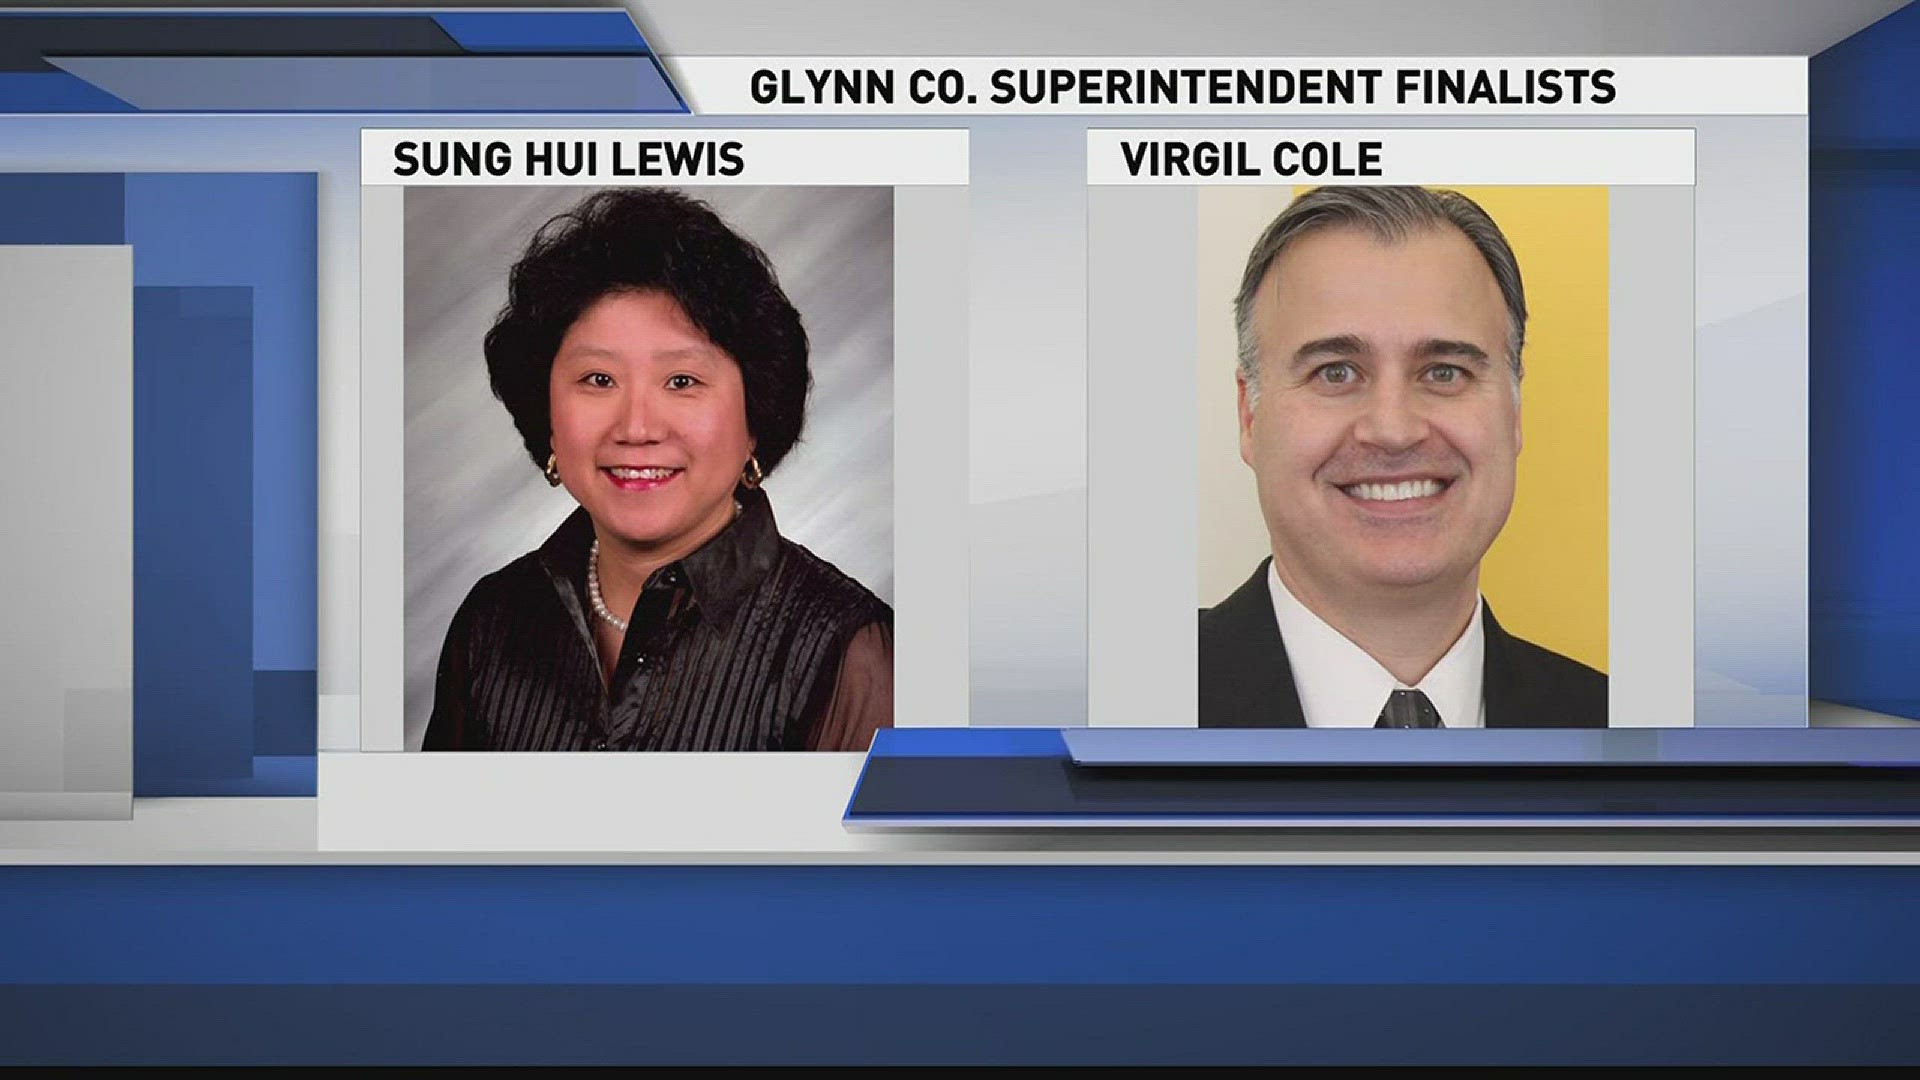 The finalists for the job are Sung Hui Lewis and Virgil Cole.